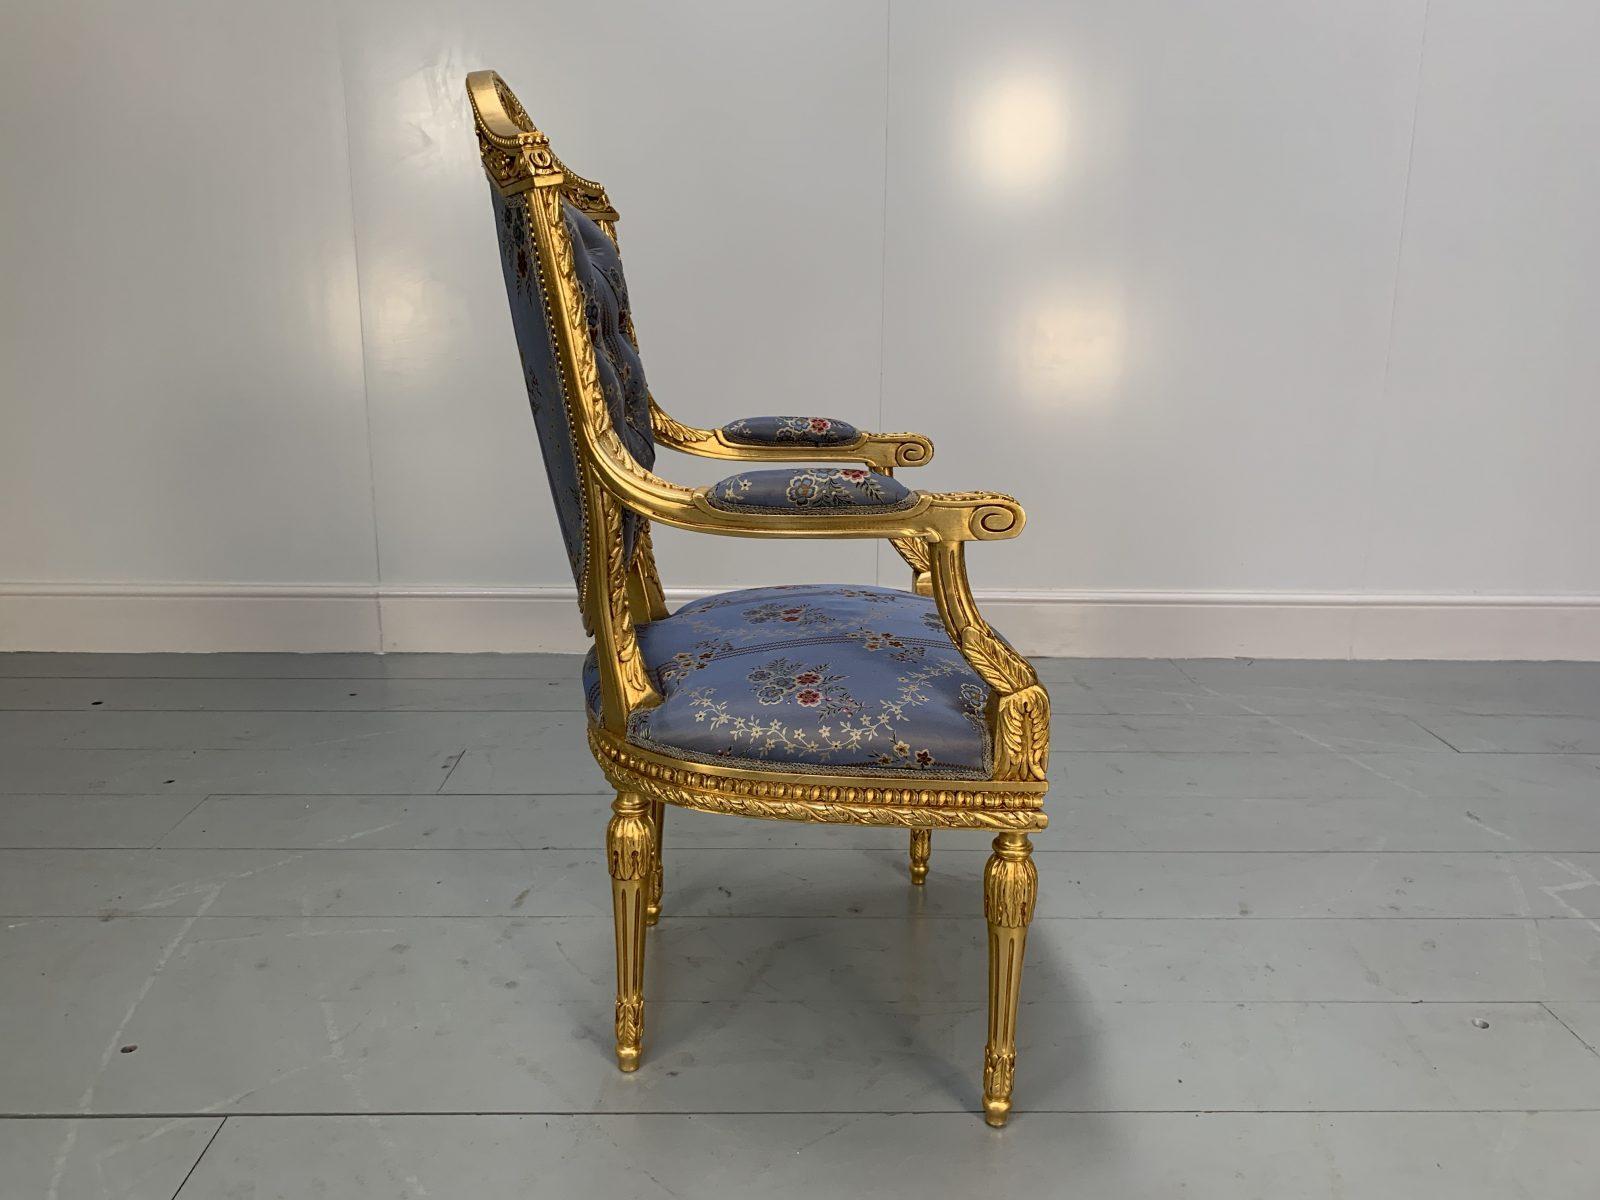 Pair of Asnaghi Fauteuil Baroque Rococo Armchairs in Floral Silk and Gilt In Good Condition For Sale In Barrowford, GB